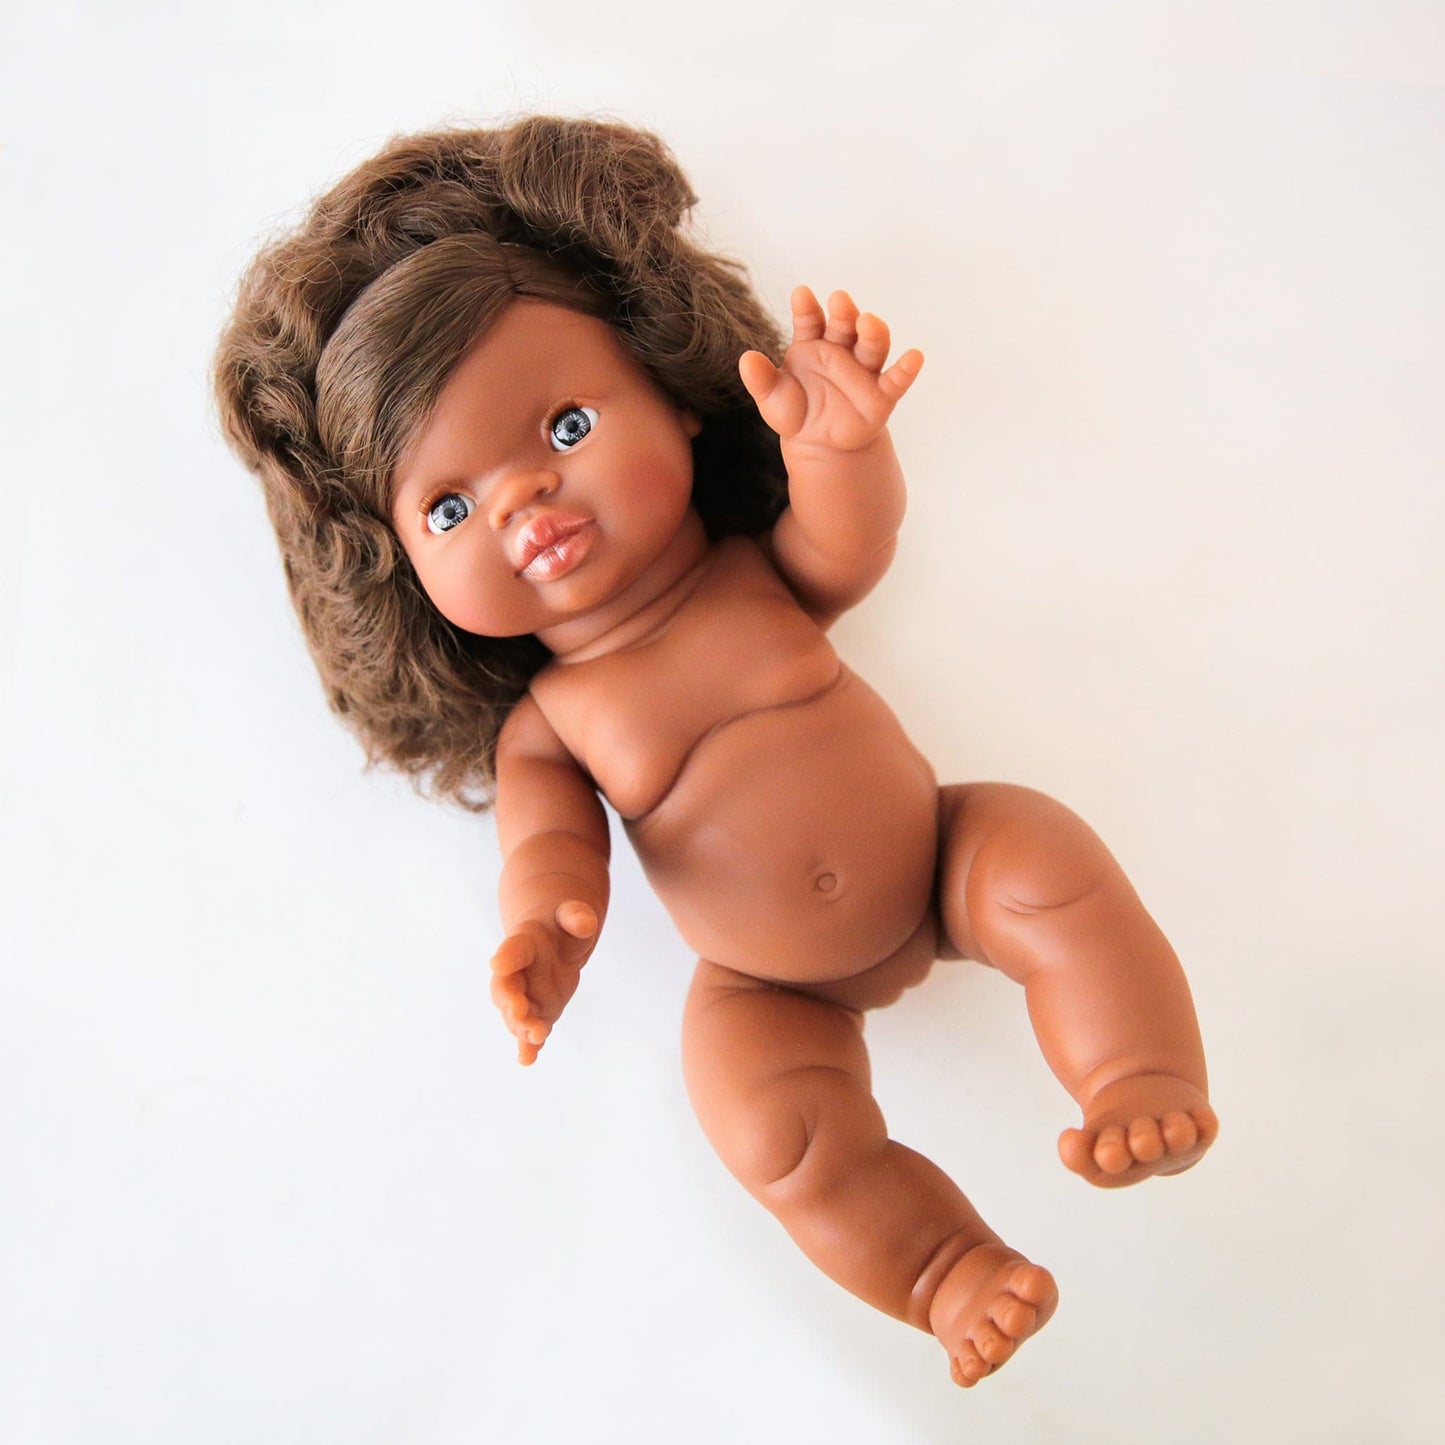 In front of a white background is a baby doll with dark brown curly hair.